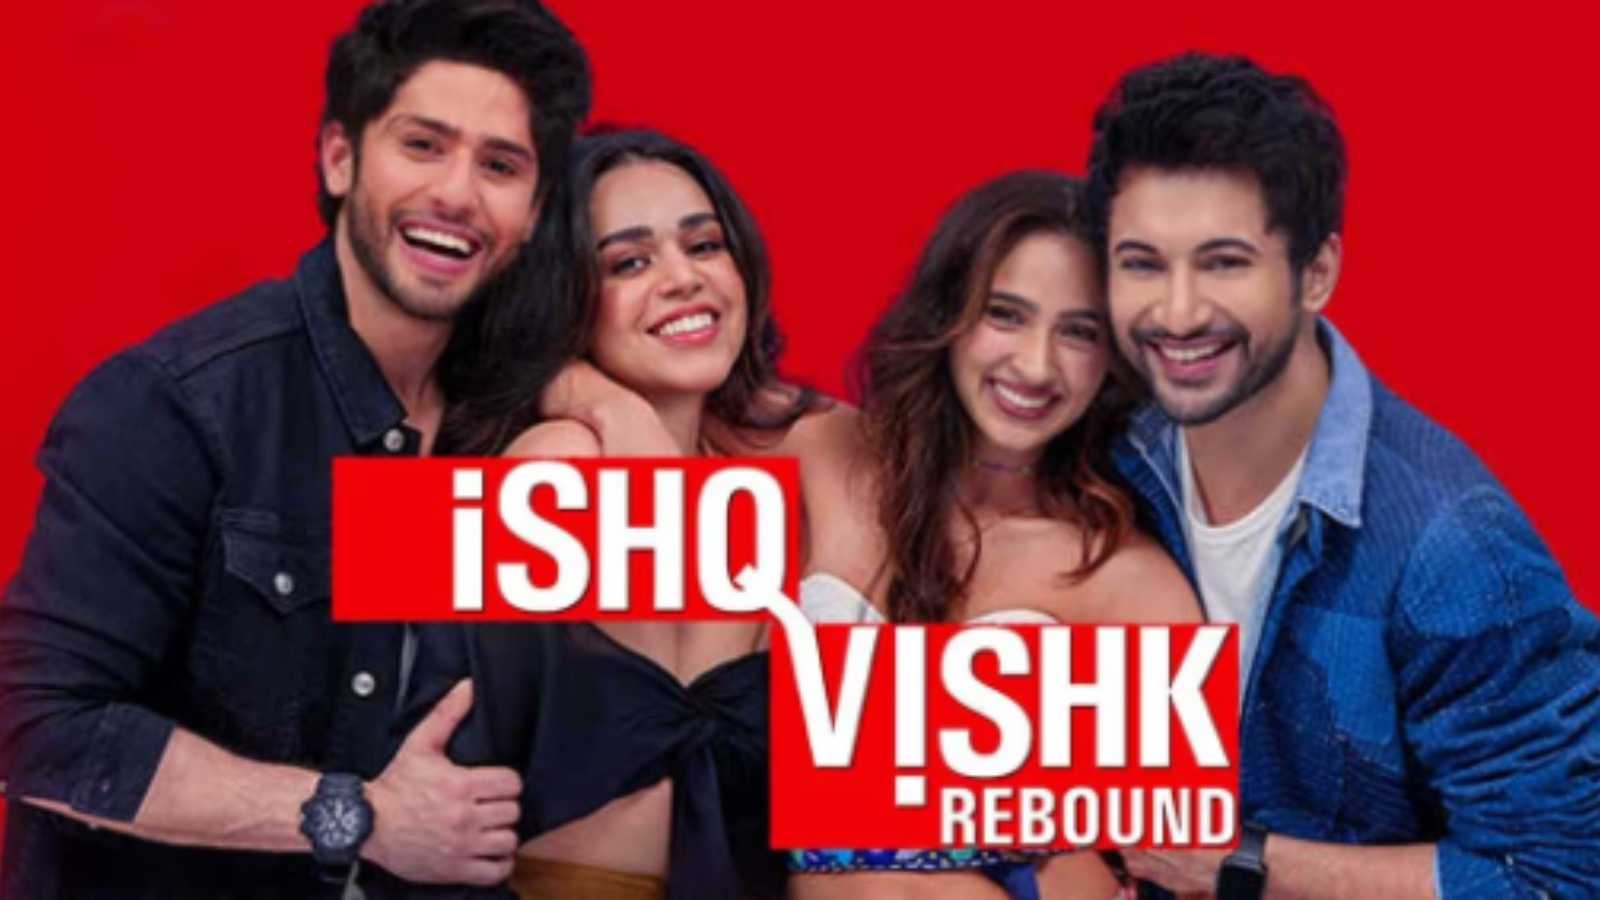 Ishq Vishk Rebound: Rohit Saraf & Pashmina Roshan starrer will have love but loads of confusion too, release date out